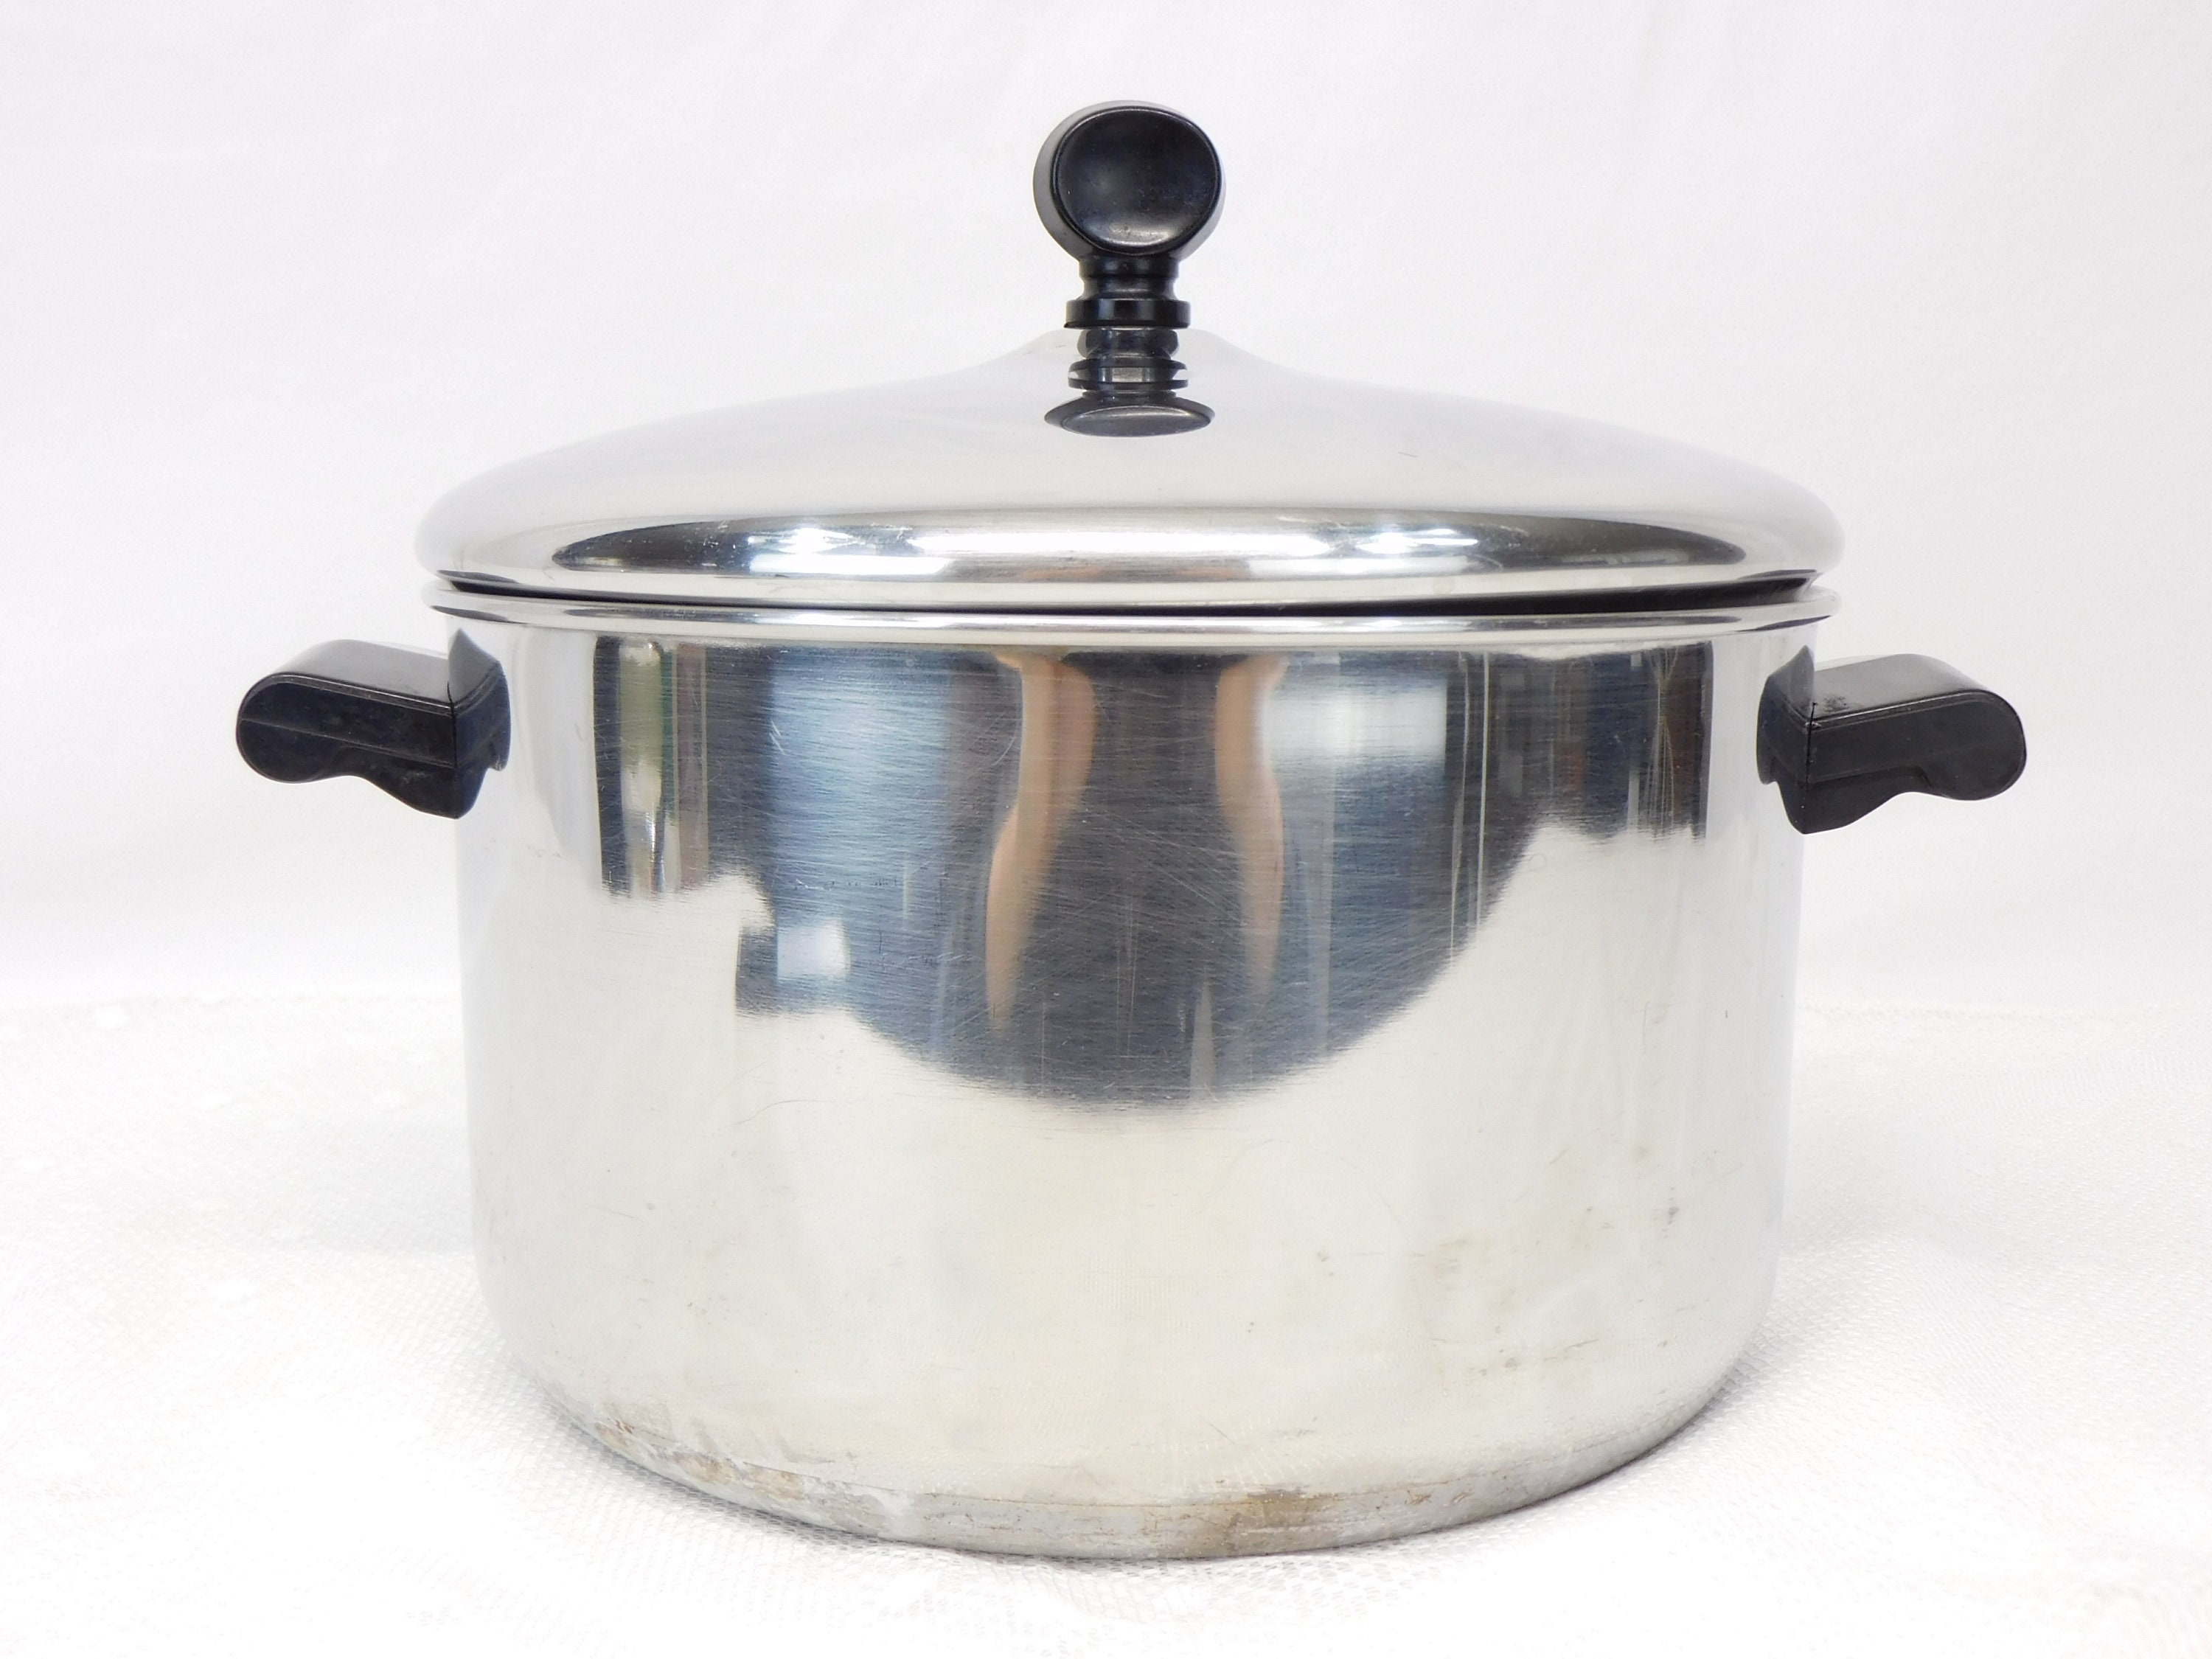 Vintage Farberware Aluminum Clad 3 Quart Double Boiler With Lid Made in  USA, Double Broiler Pan Set, Morethebuckles 